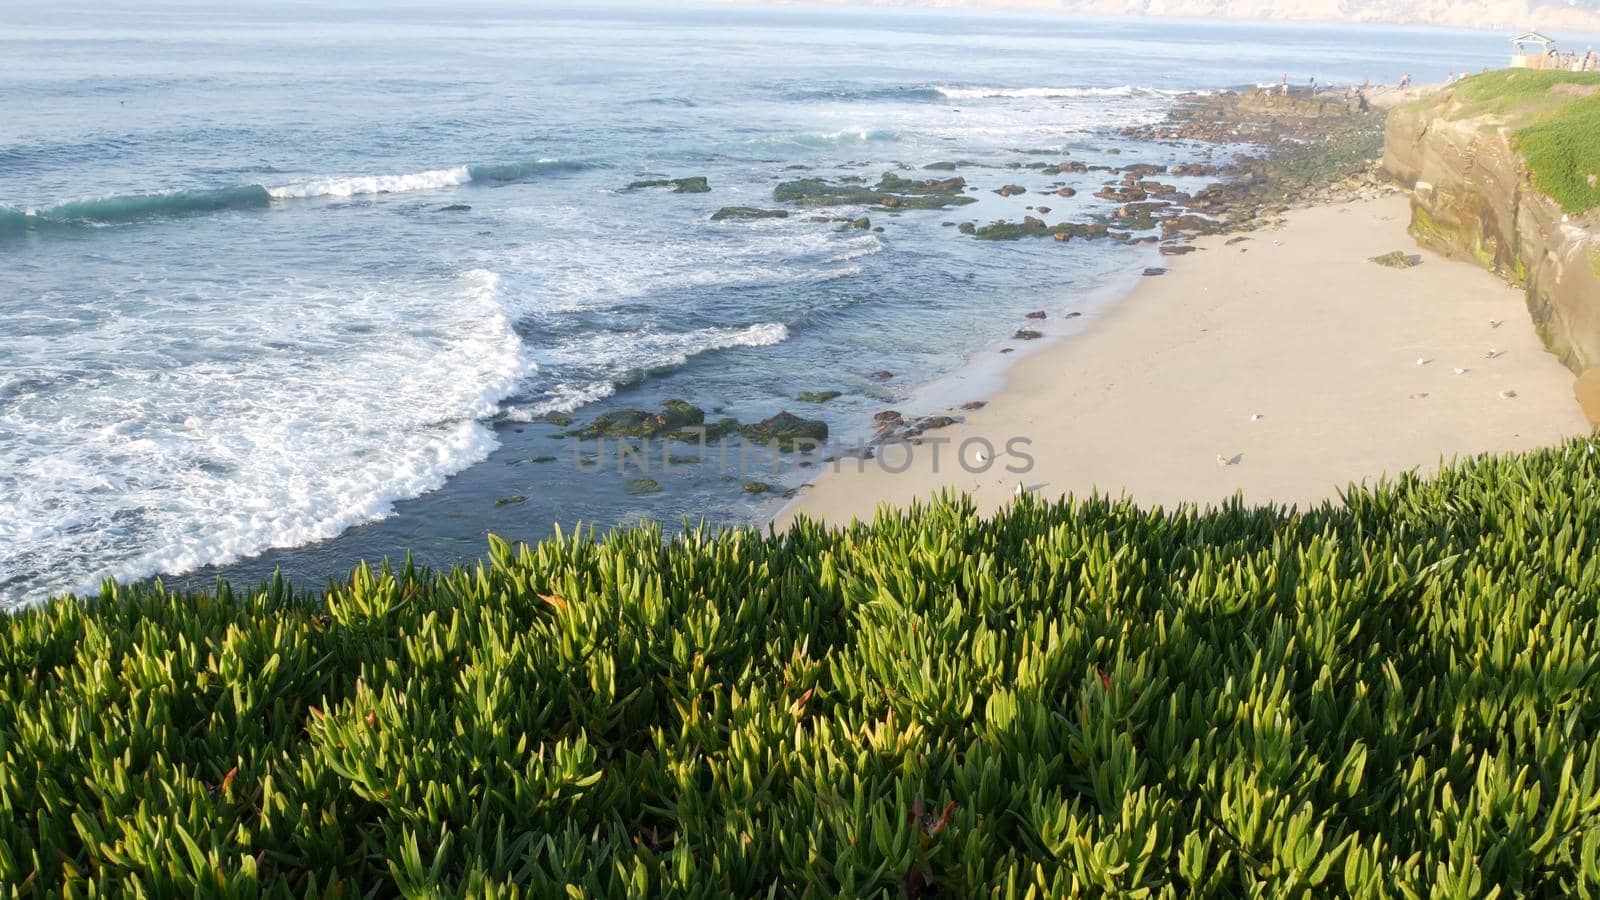 Green pigface sour fig succulent over pacific ocean splashing waves. Ice plant greenery on the steep cliff. Hottentot sea fig near waters edge, vista point in La Jolla Cove, San Diego, California USA by DogoraSun